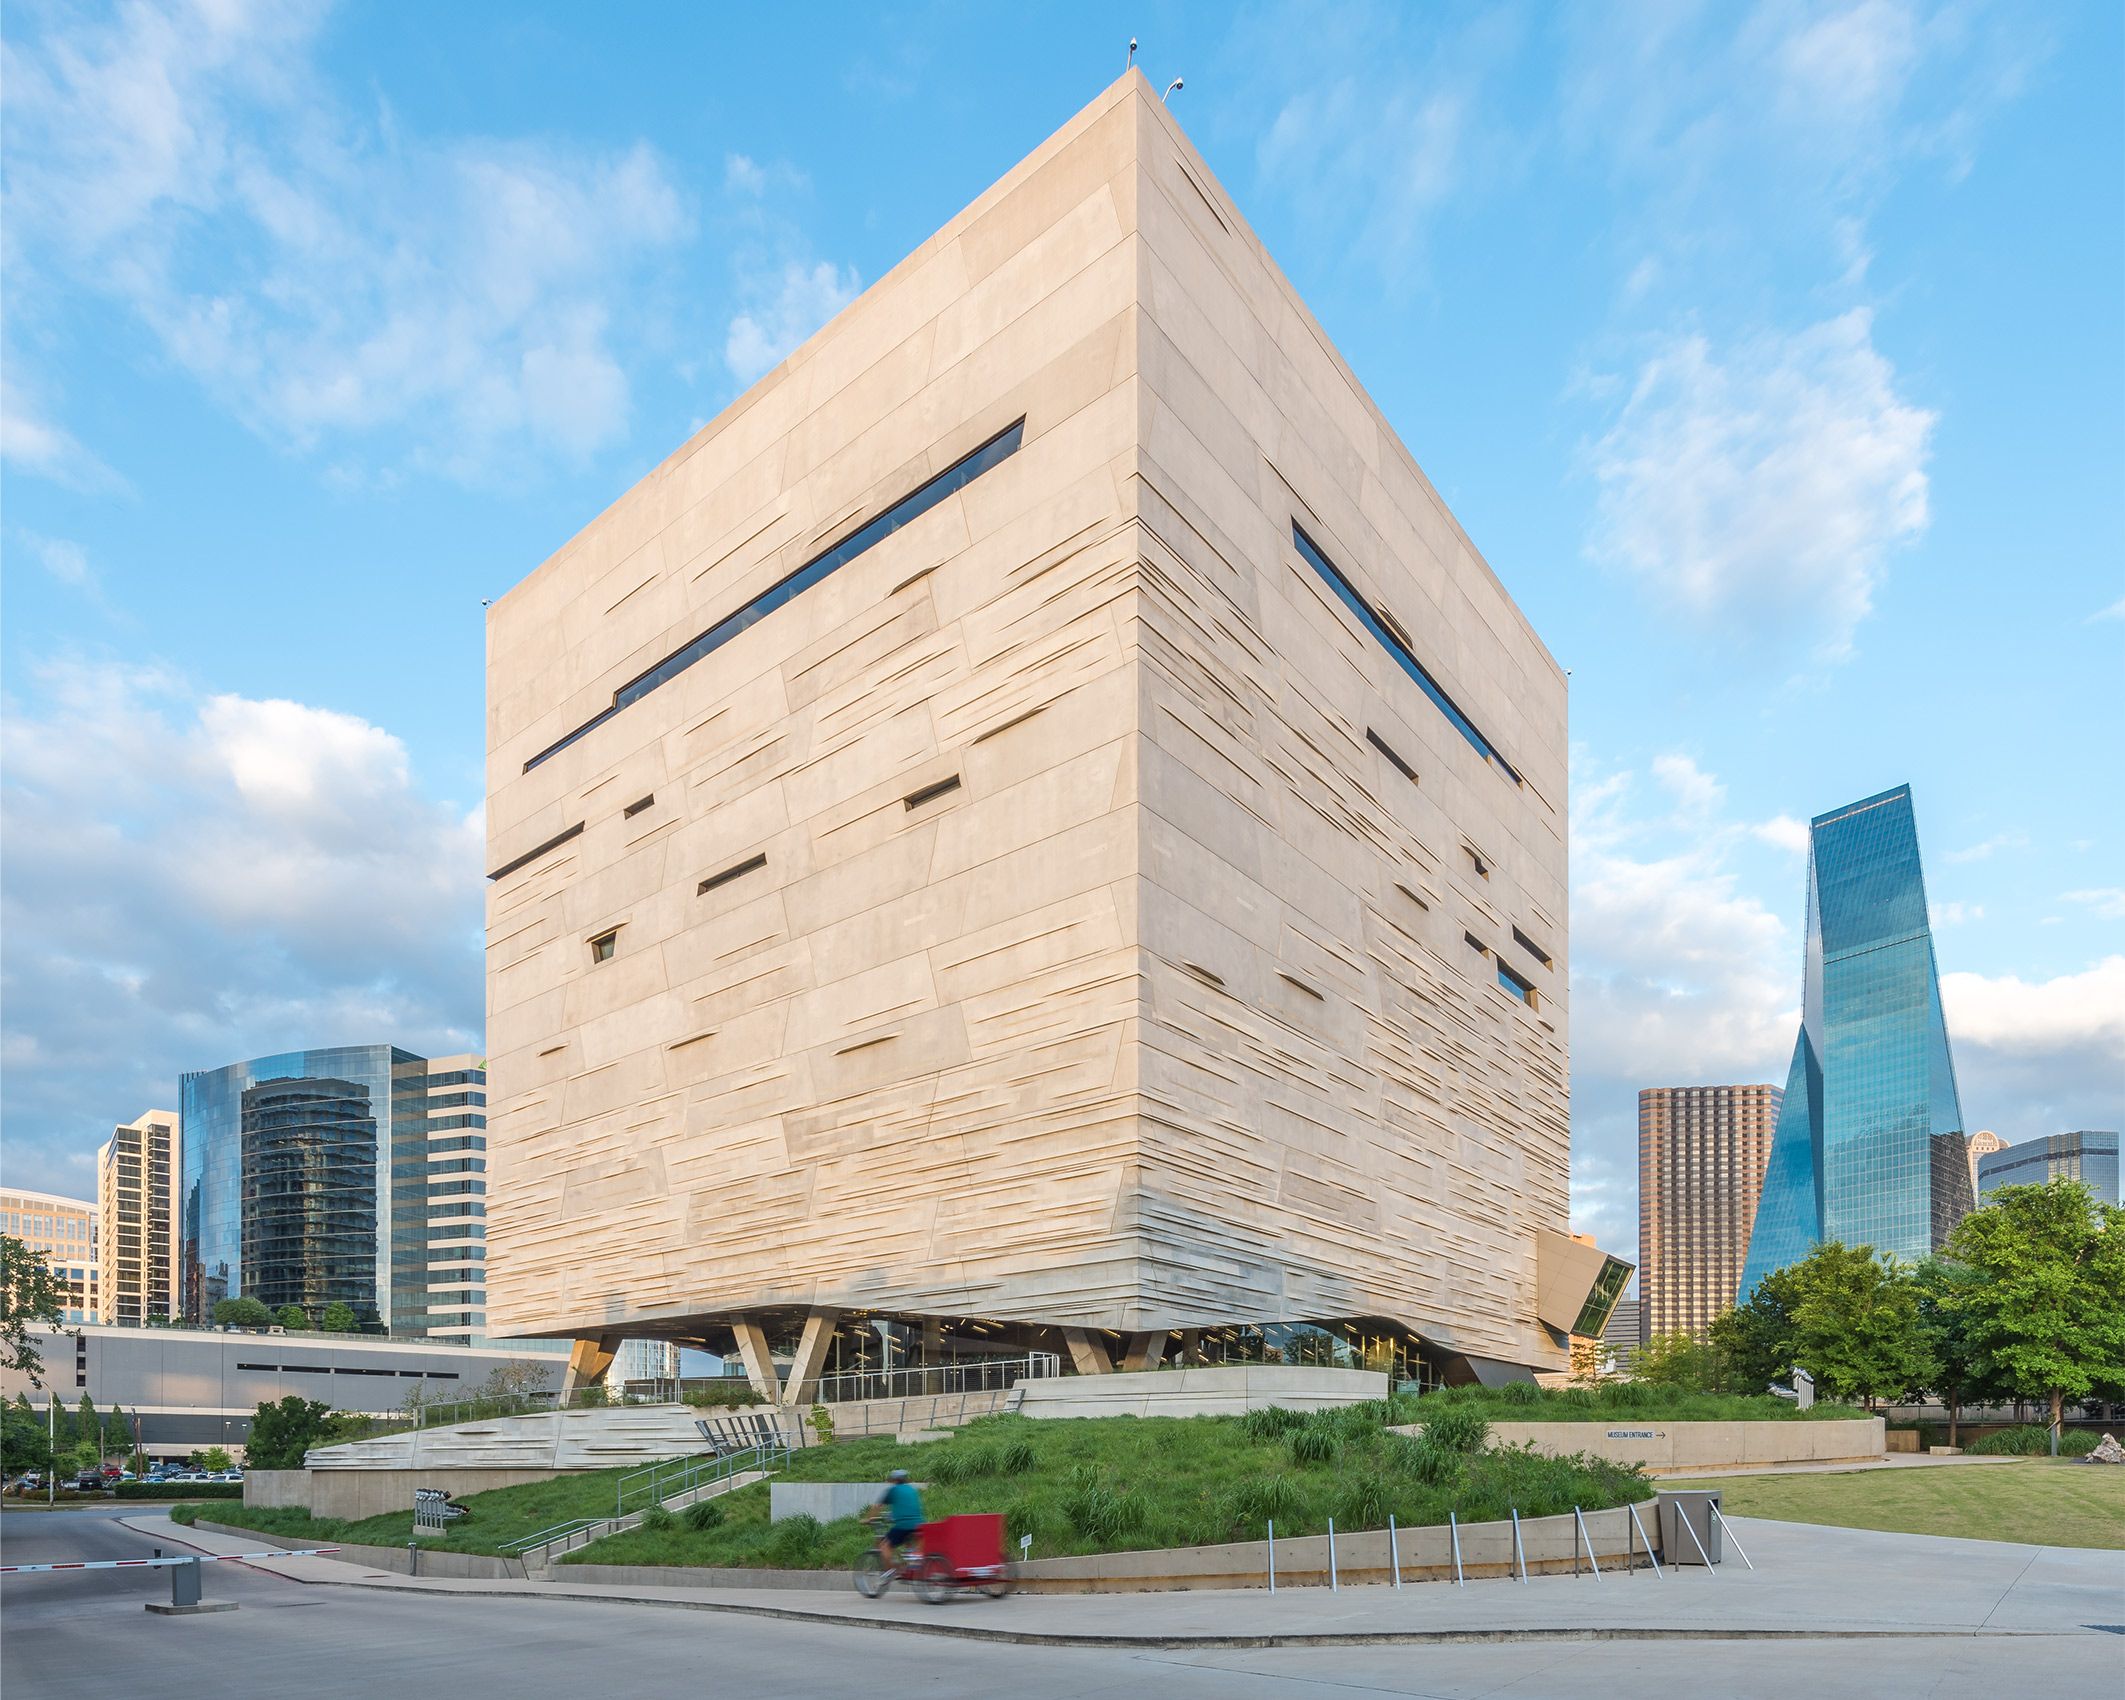 PEROT MUSEUM OF NATURE AND SCIENCE